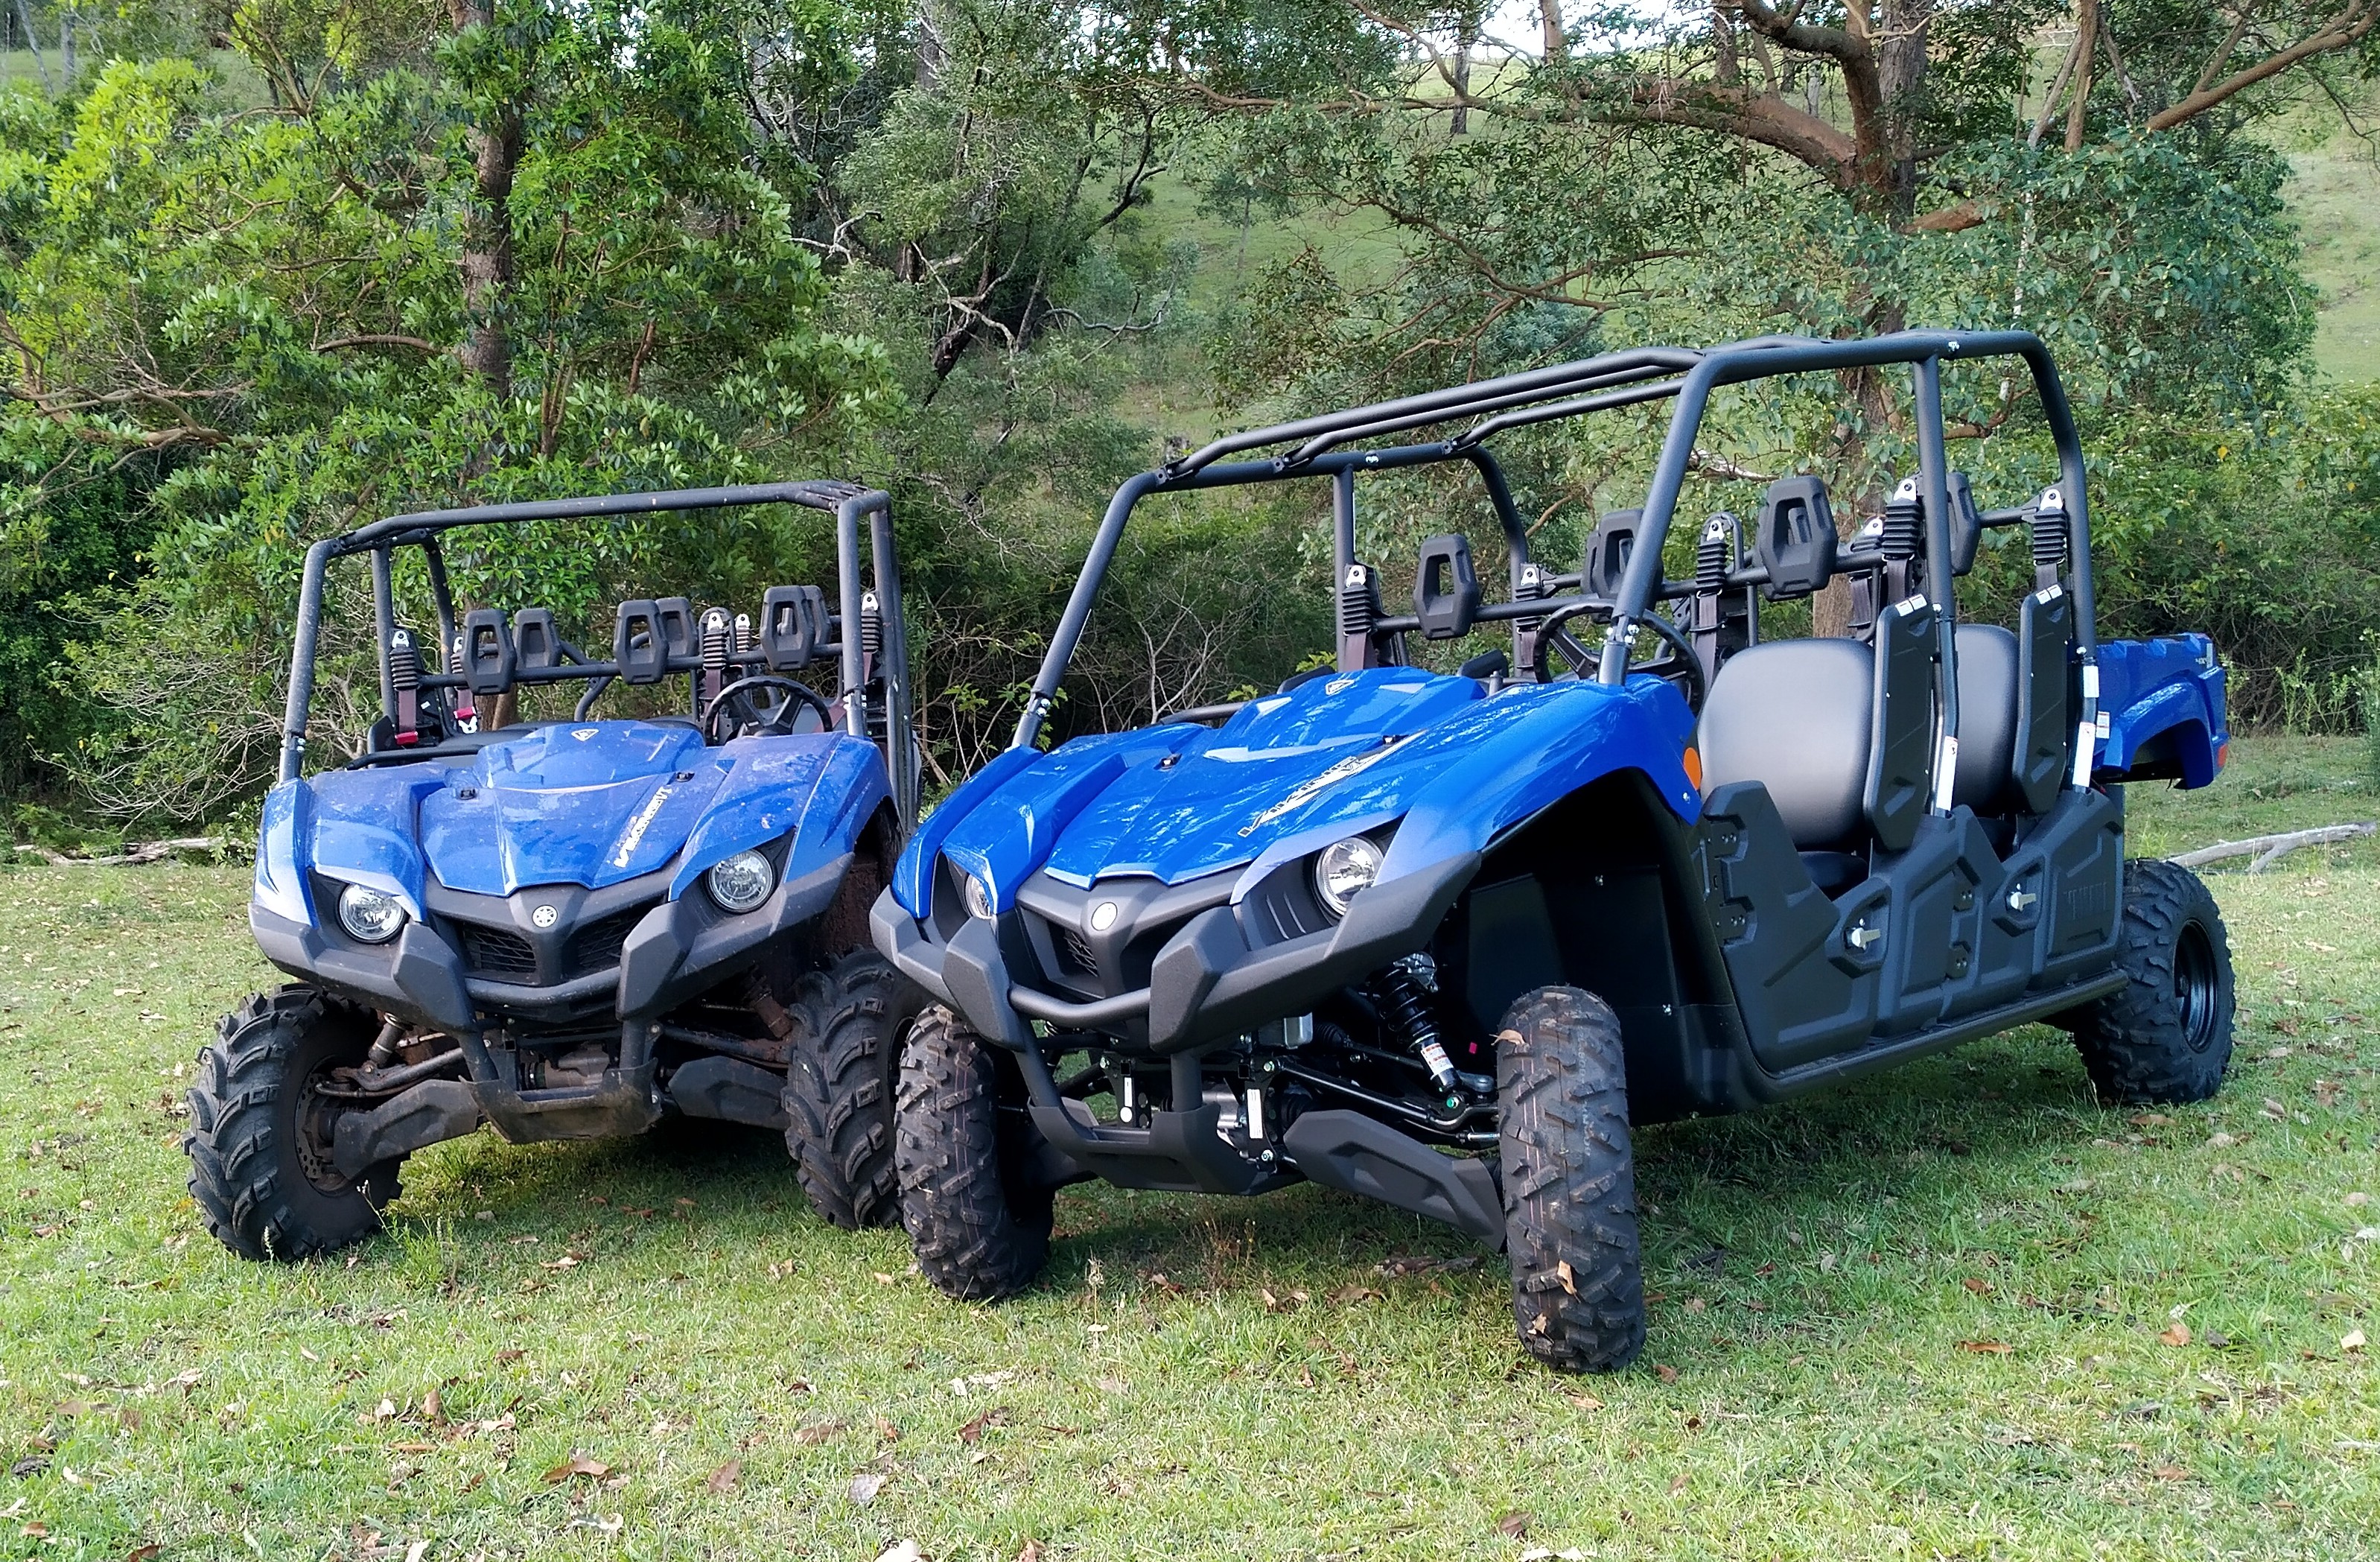 4WD Buggies - Offsite